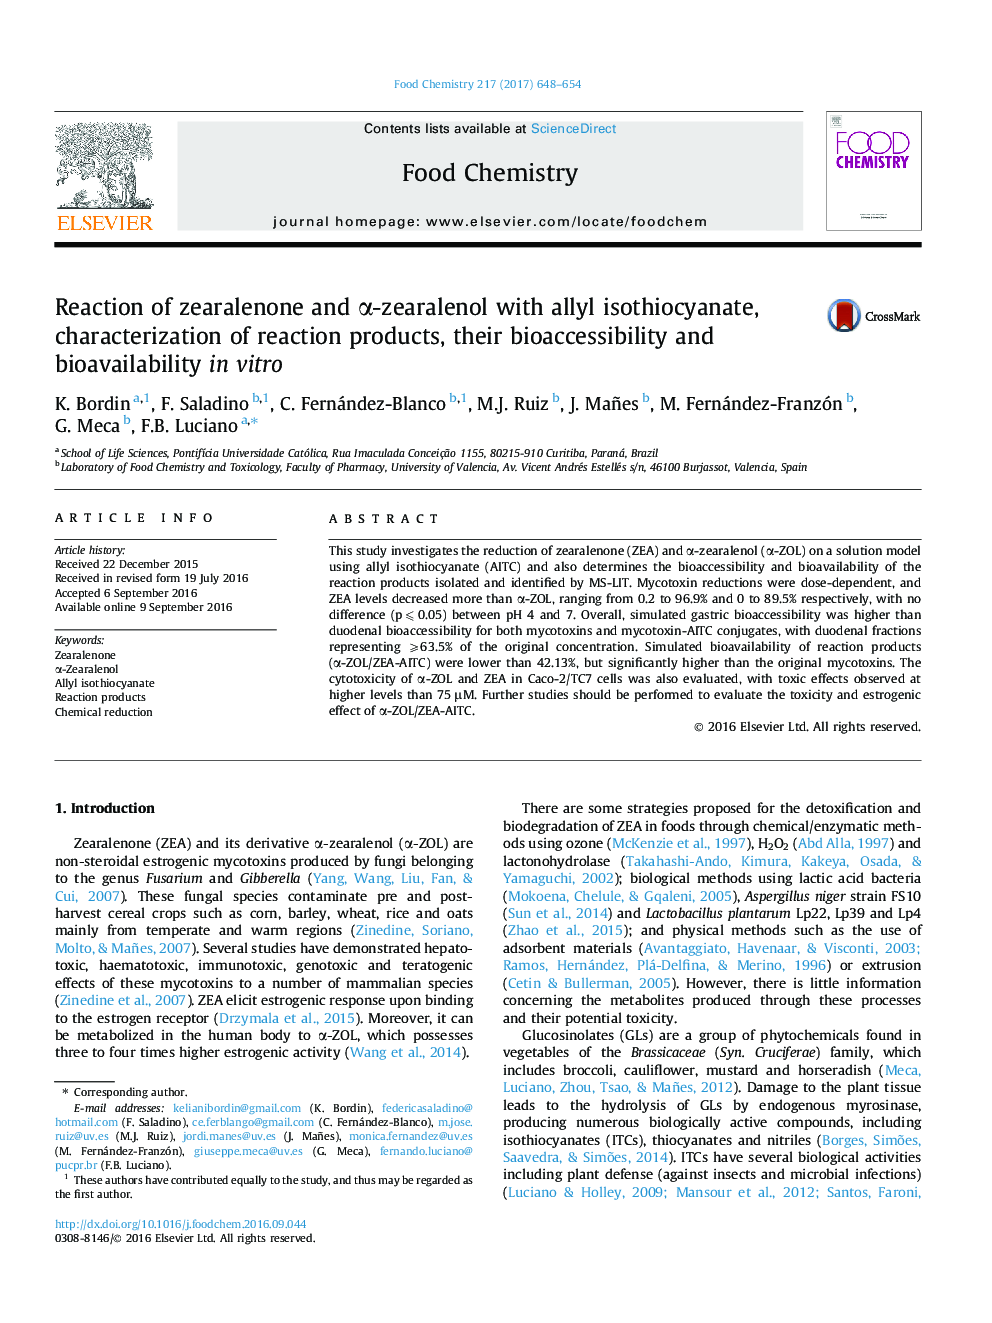 Reaction of zearalenone and Î±-zearalenol with allyl isothiocyanate, characterization of reaction products, their bioaccessibility and bioavailability in vitro